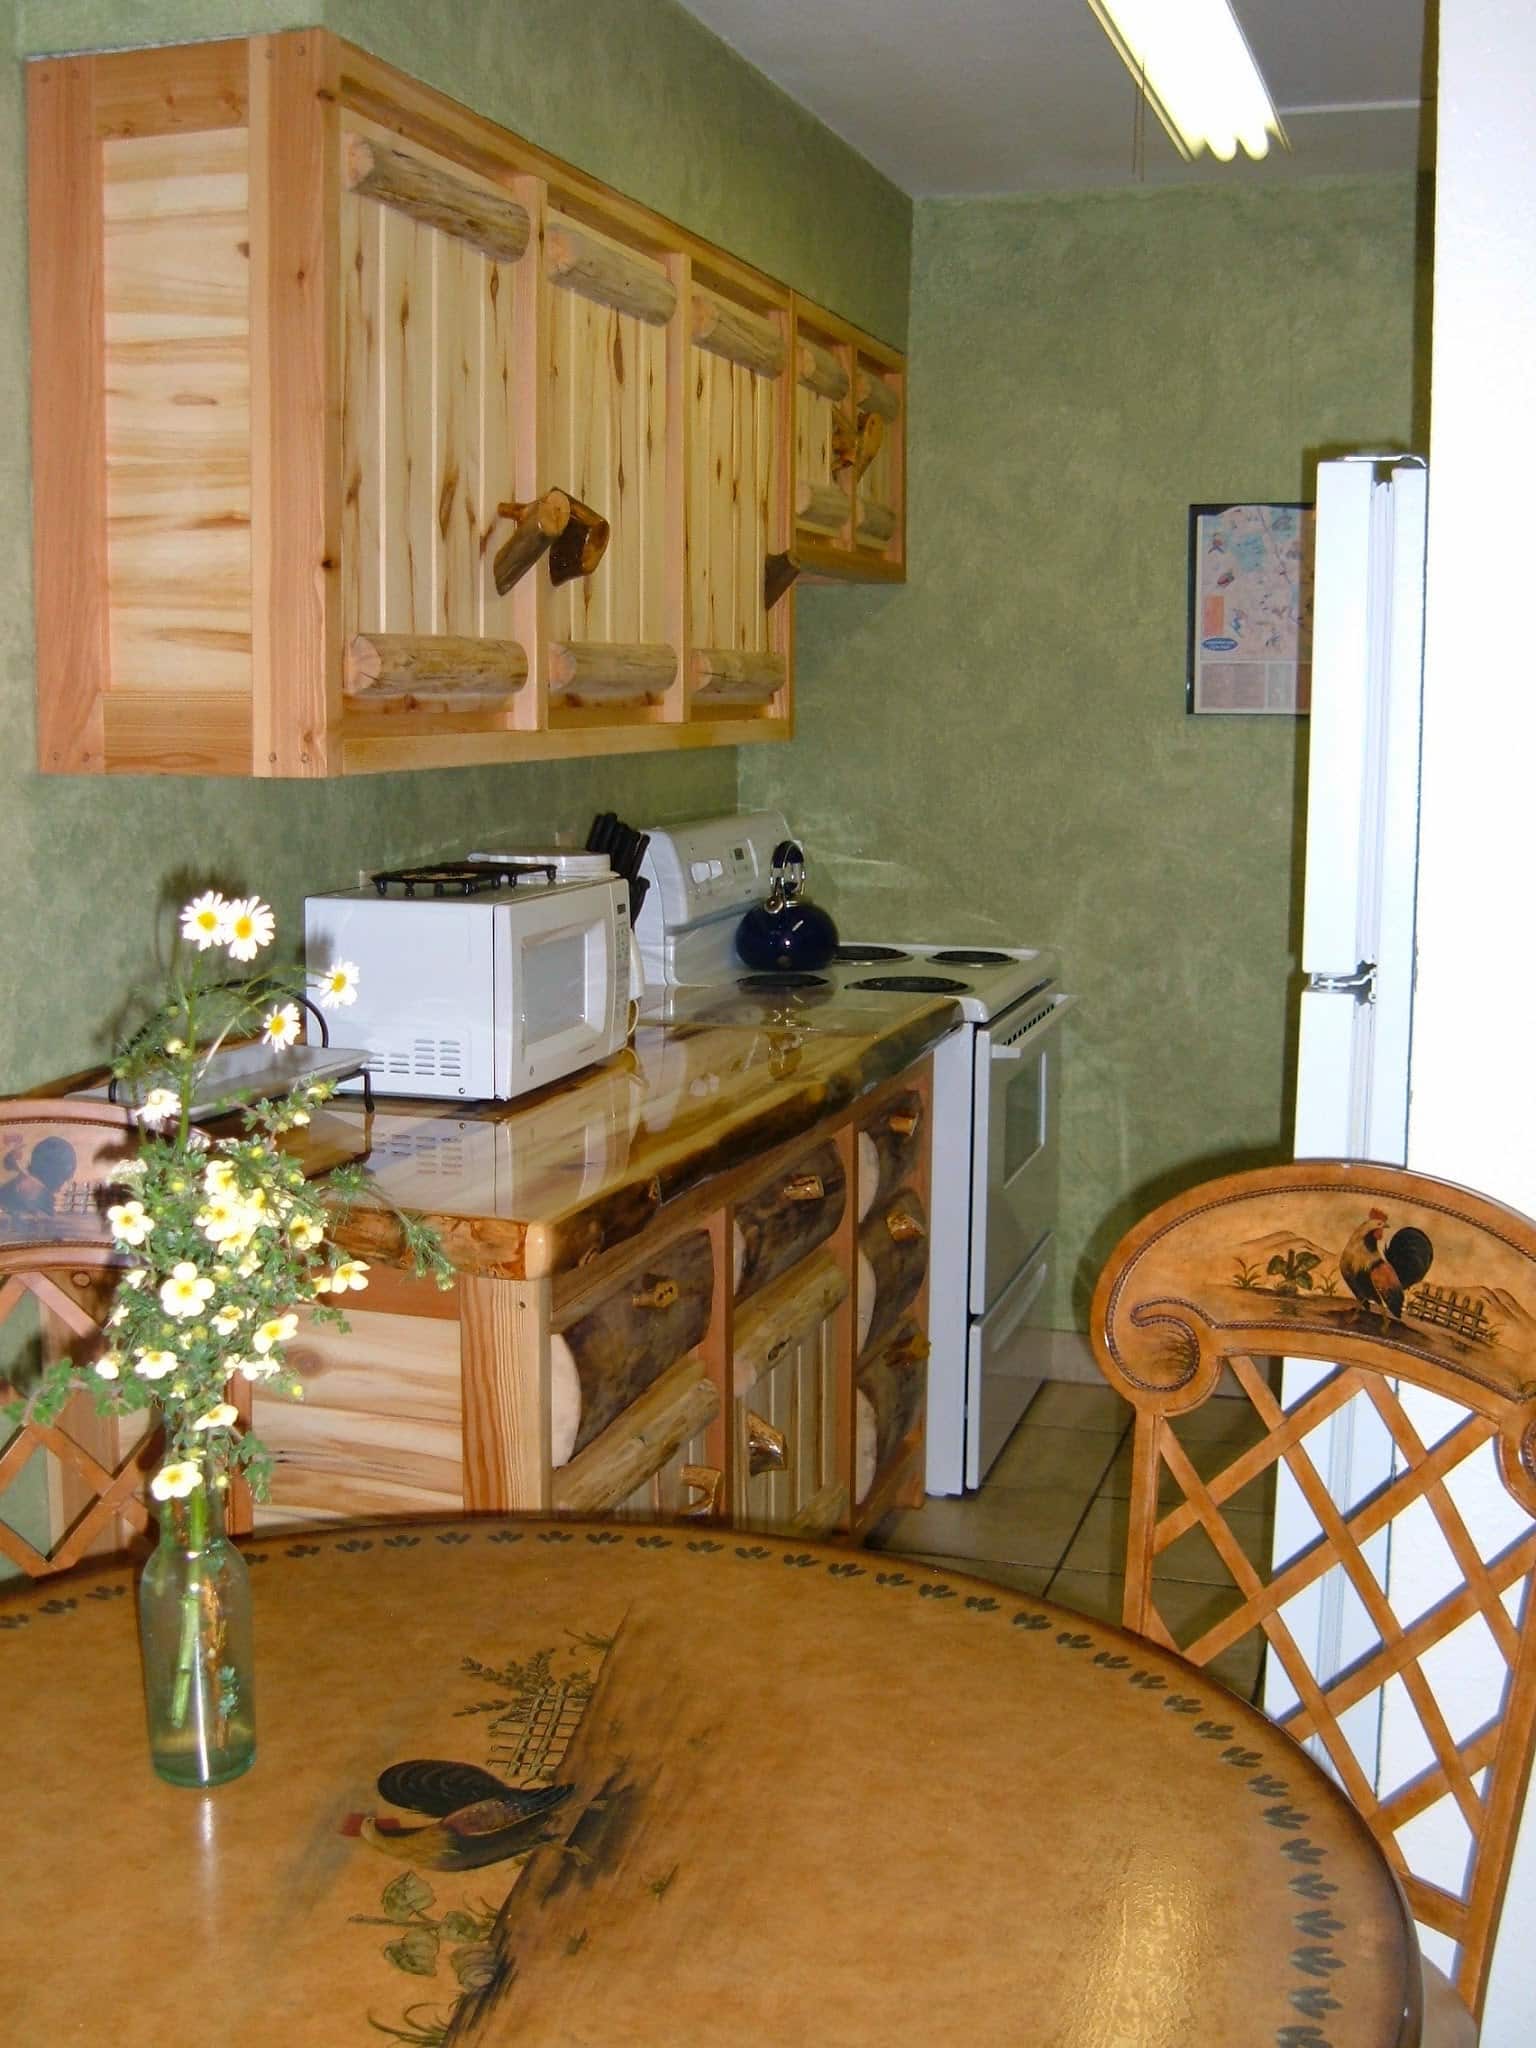 Kitchen with beautiful log cabinets, tile floors, and faux green walls.  Dinning table with faux painting of a rooster